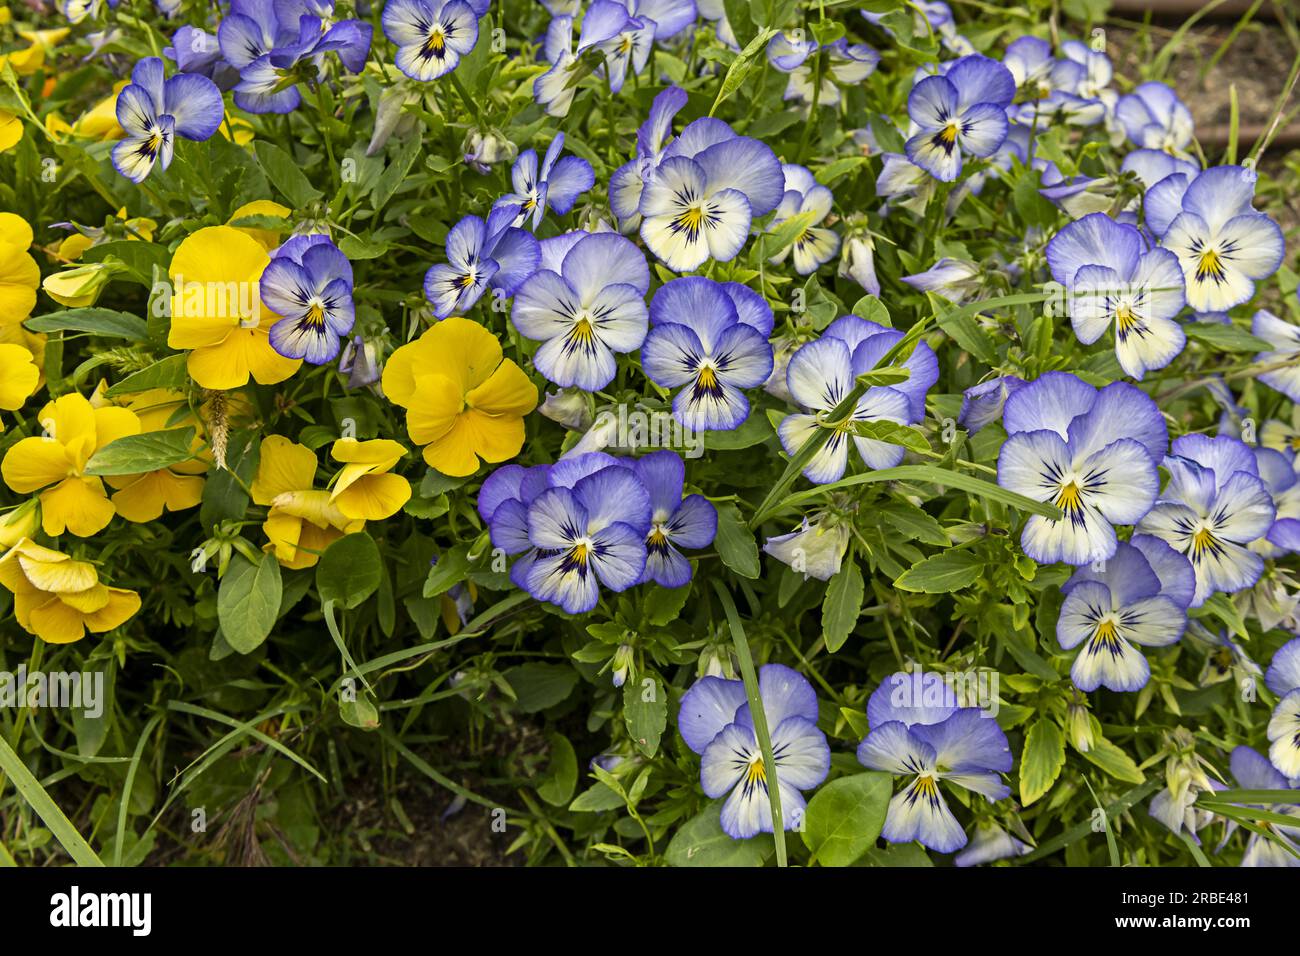 a lot of purple and yellow pansy flowers on the grass in a park Stock Photo